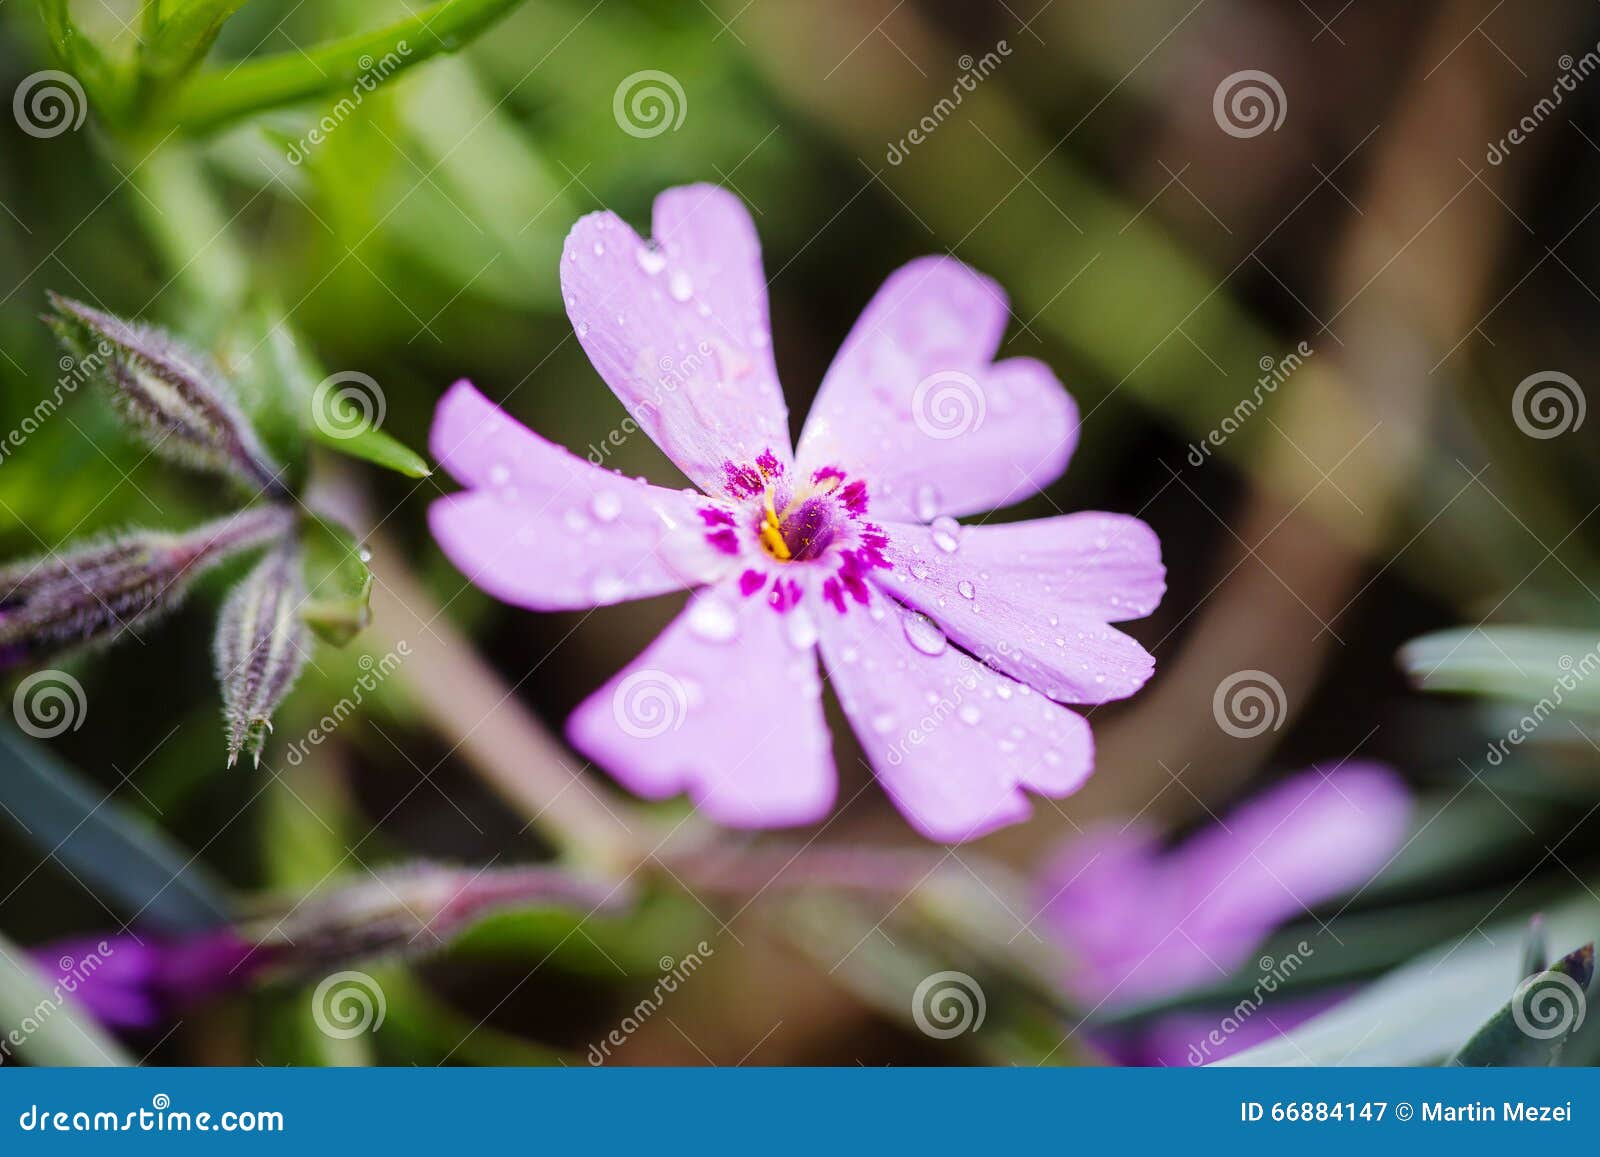 Flower (anthos, flos) stock image. Image colorful - 66884147